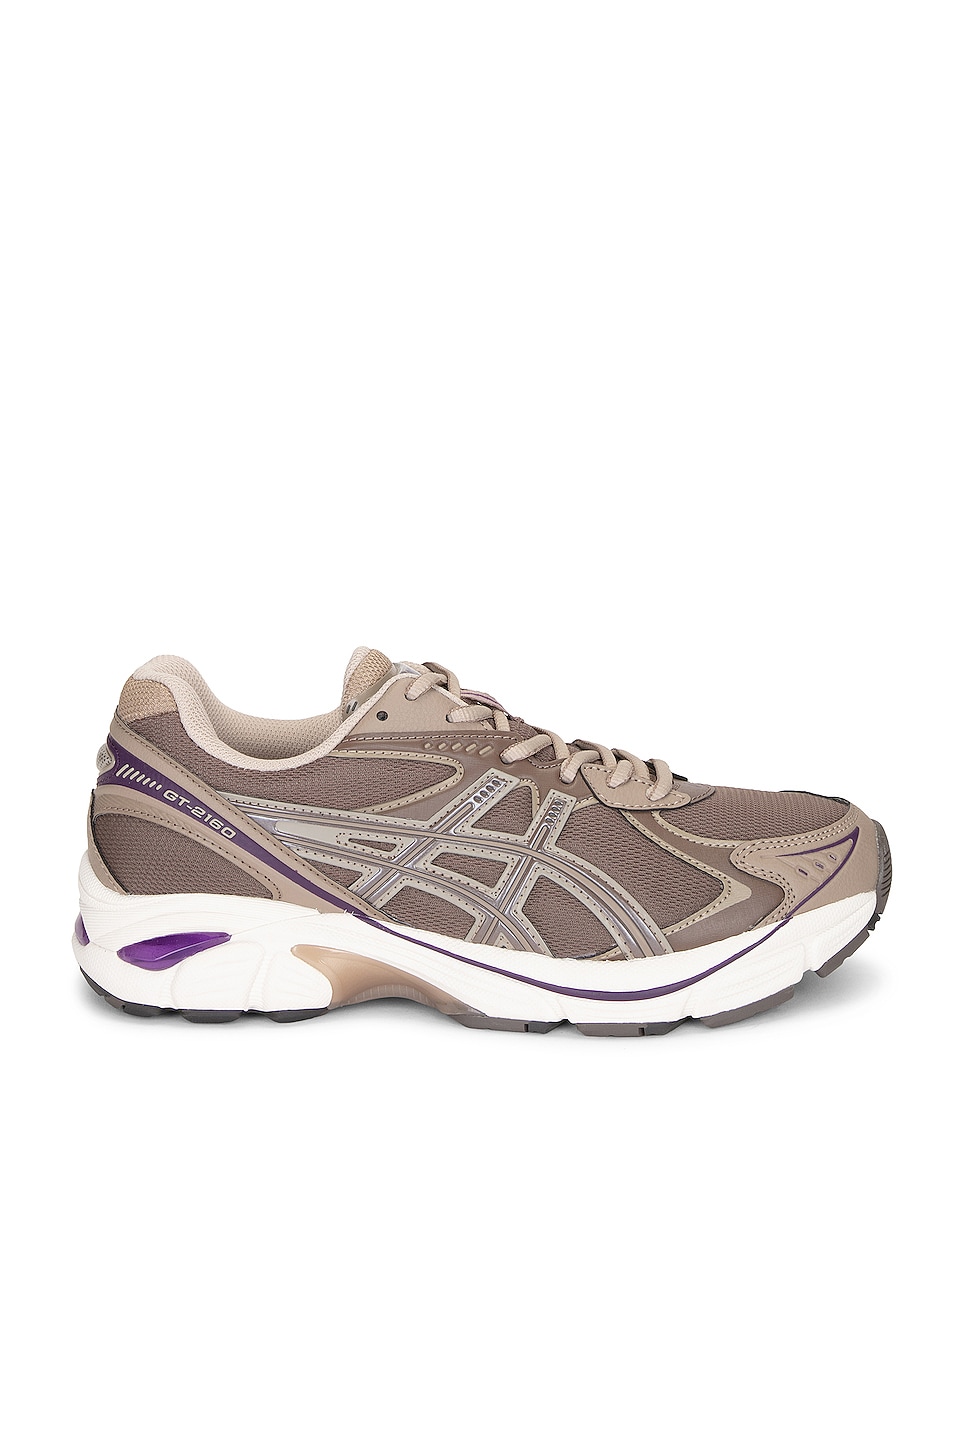 Image 1 of Asics Gt-2160 Sneaker in Dark Taupe & Taupe Grey